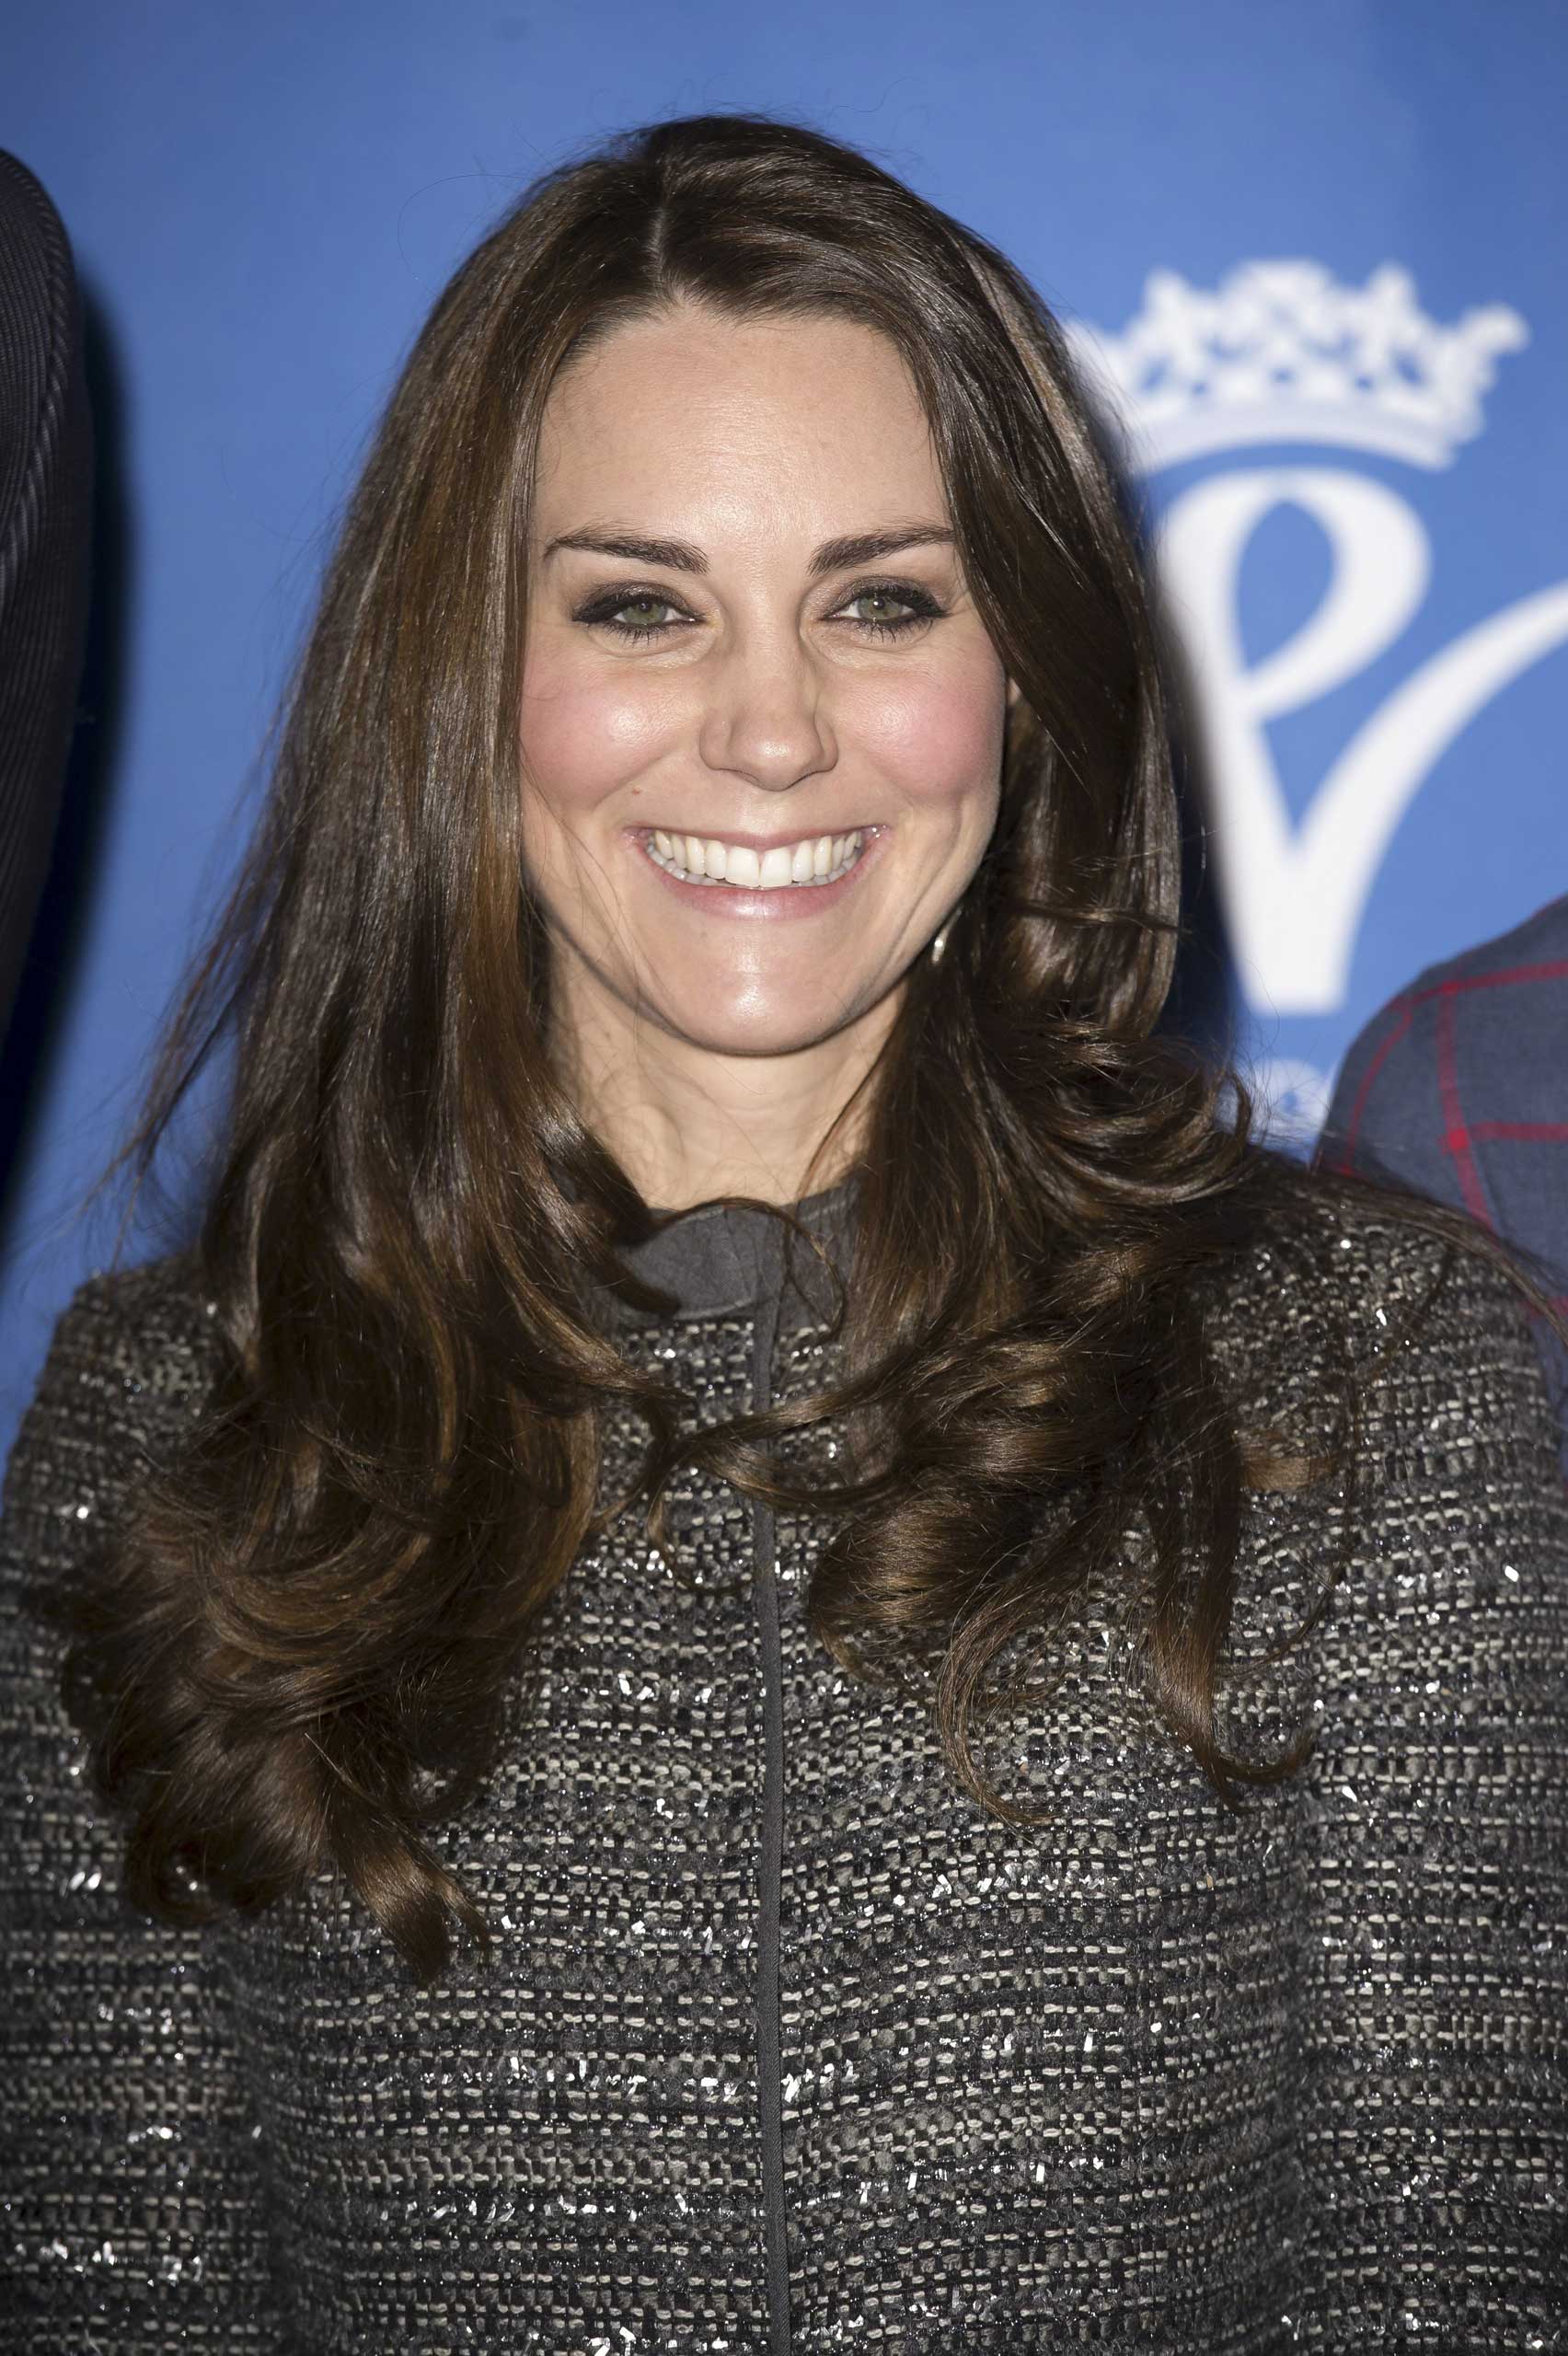 Catherine, Duchess of Cambridge at the Brooklyn Nets vs Cleveland Cavaliers NBA Basketball game on Dec. 8, 2014 in New York City.